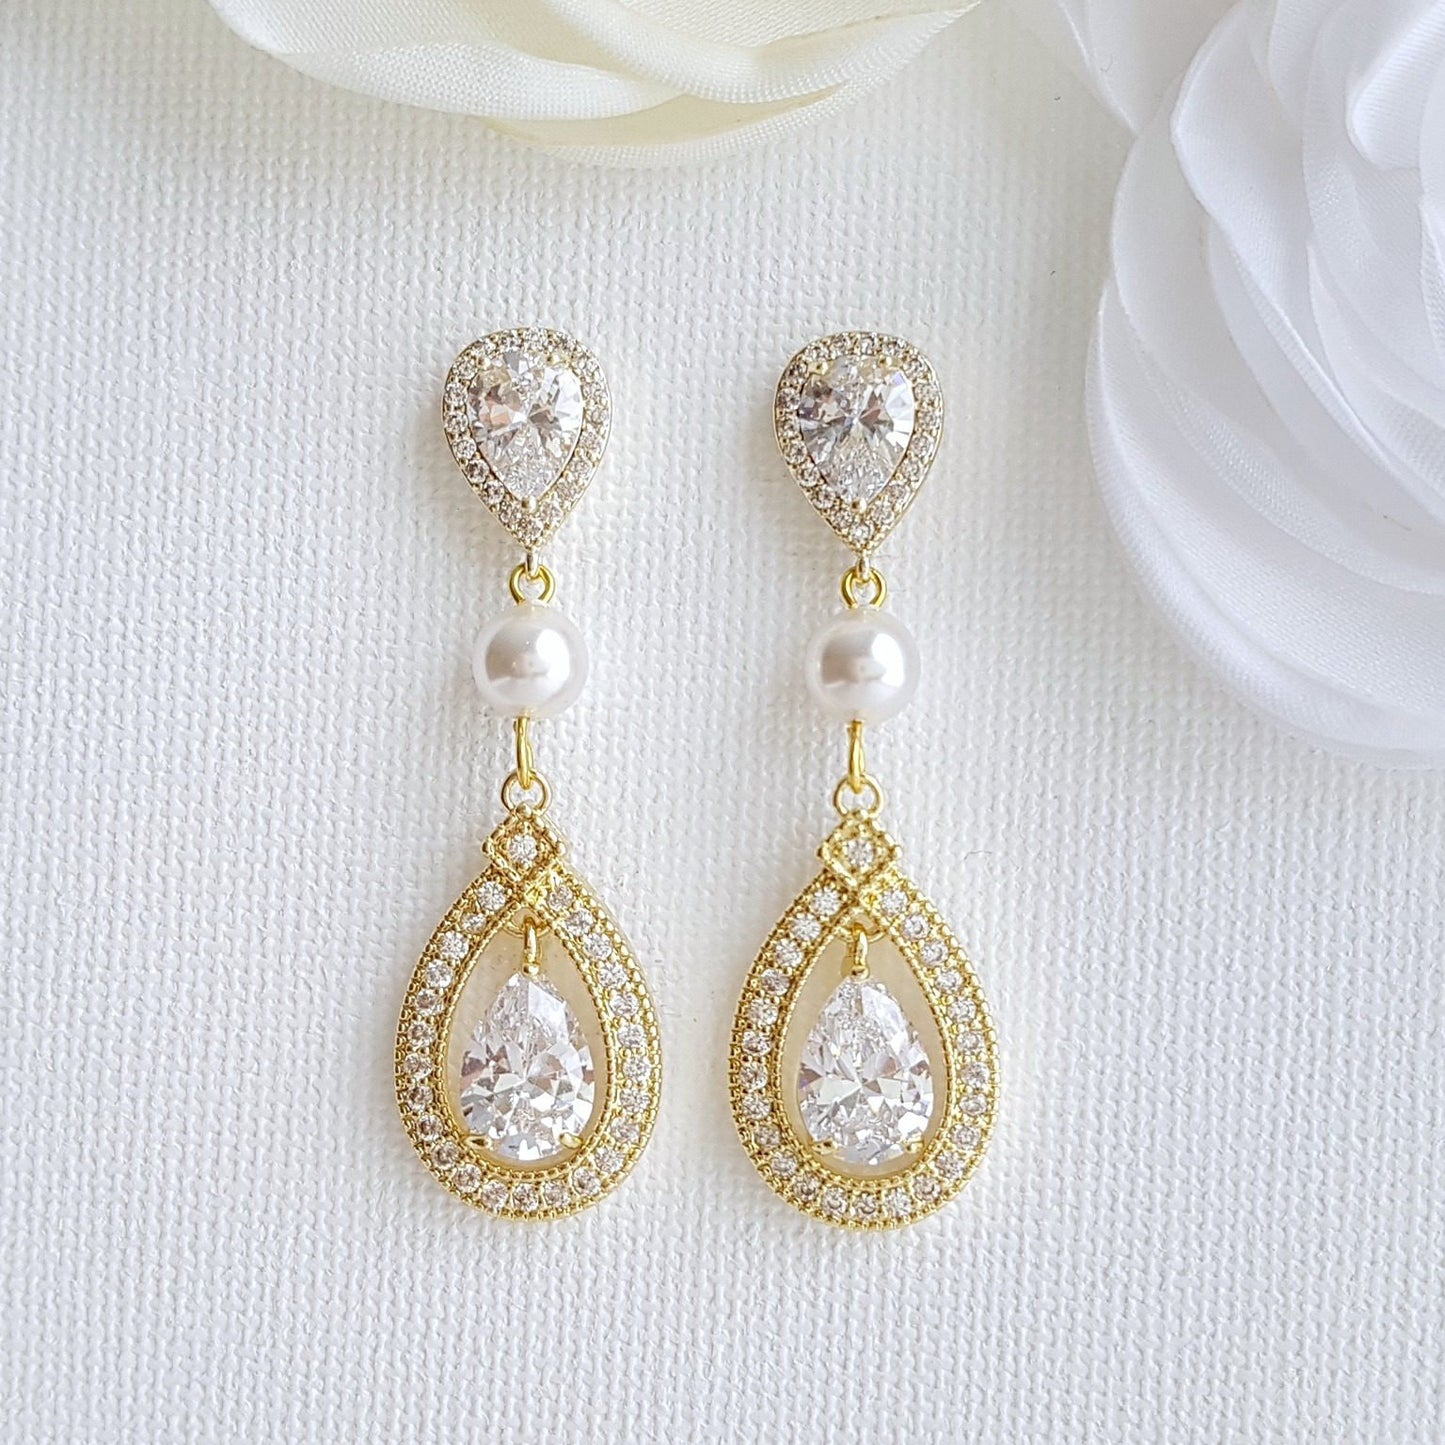 Gold Bridal Earrings With Pearls & Cubic Zirconia- Poetry Designs